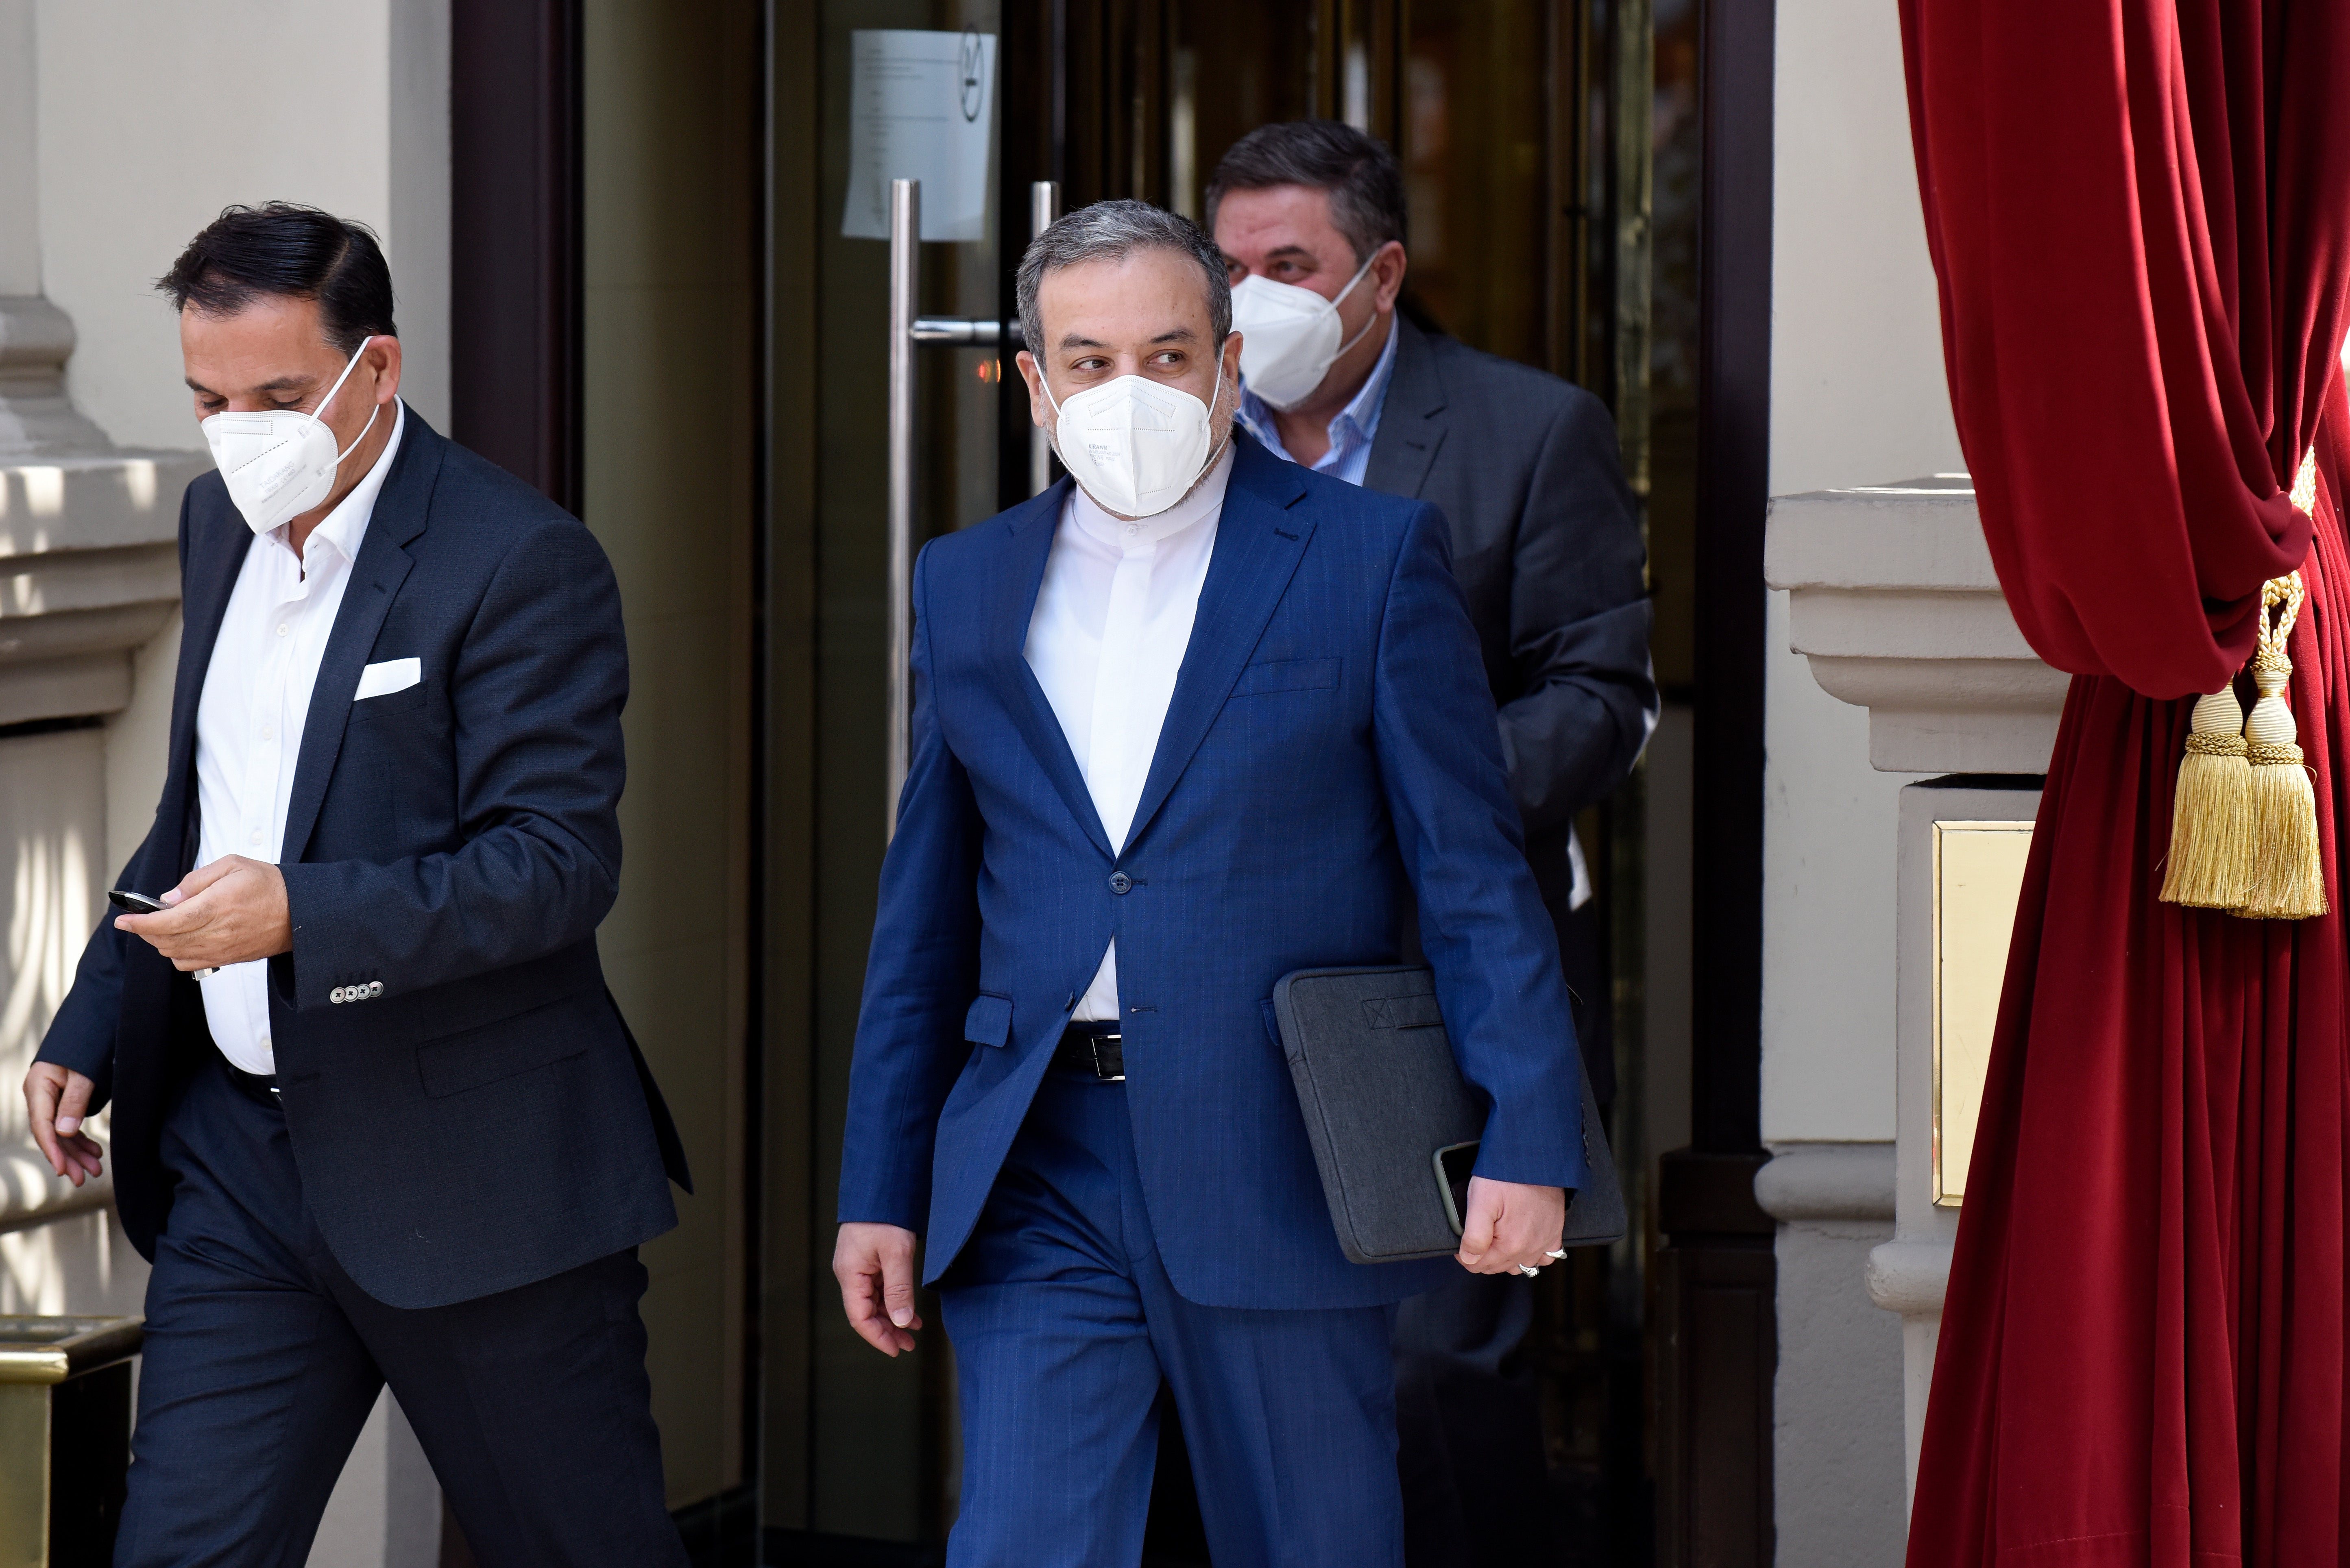 Iranian deputy foreign minister Abbas Araghchi in Vienna as nuclear talks were ab out to resume